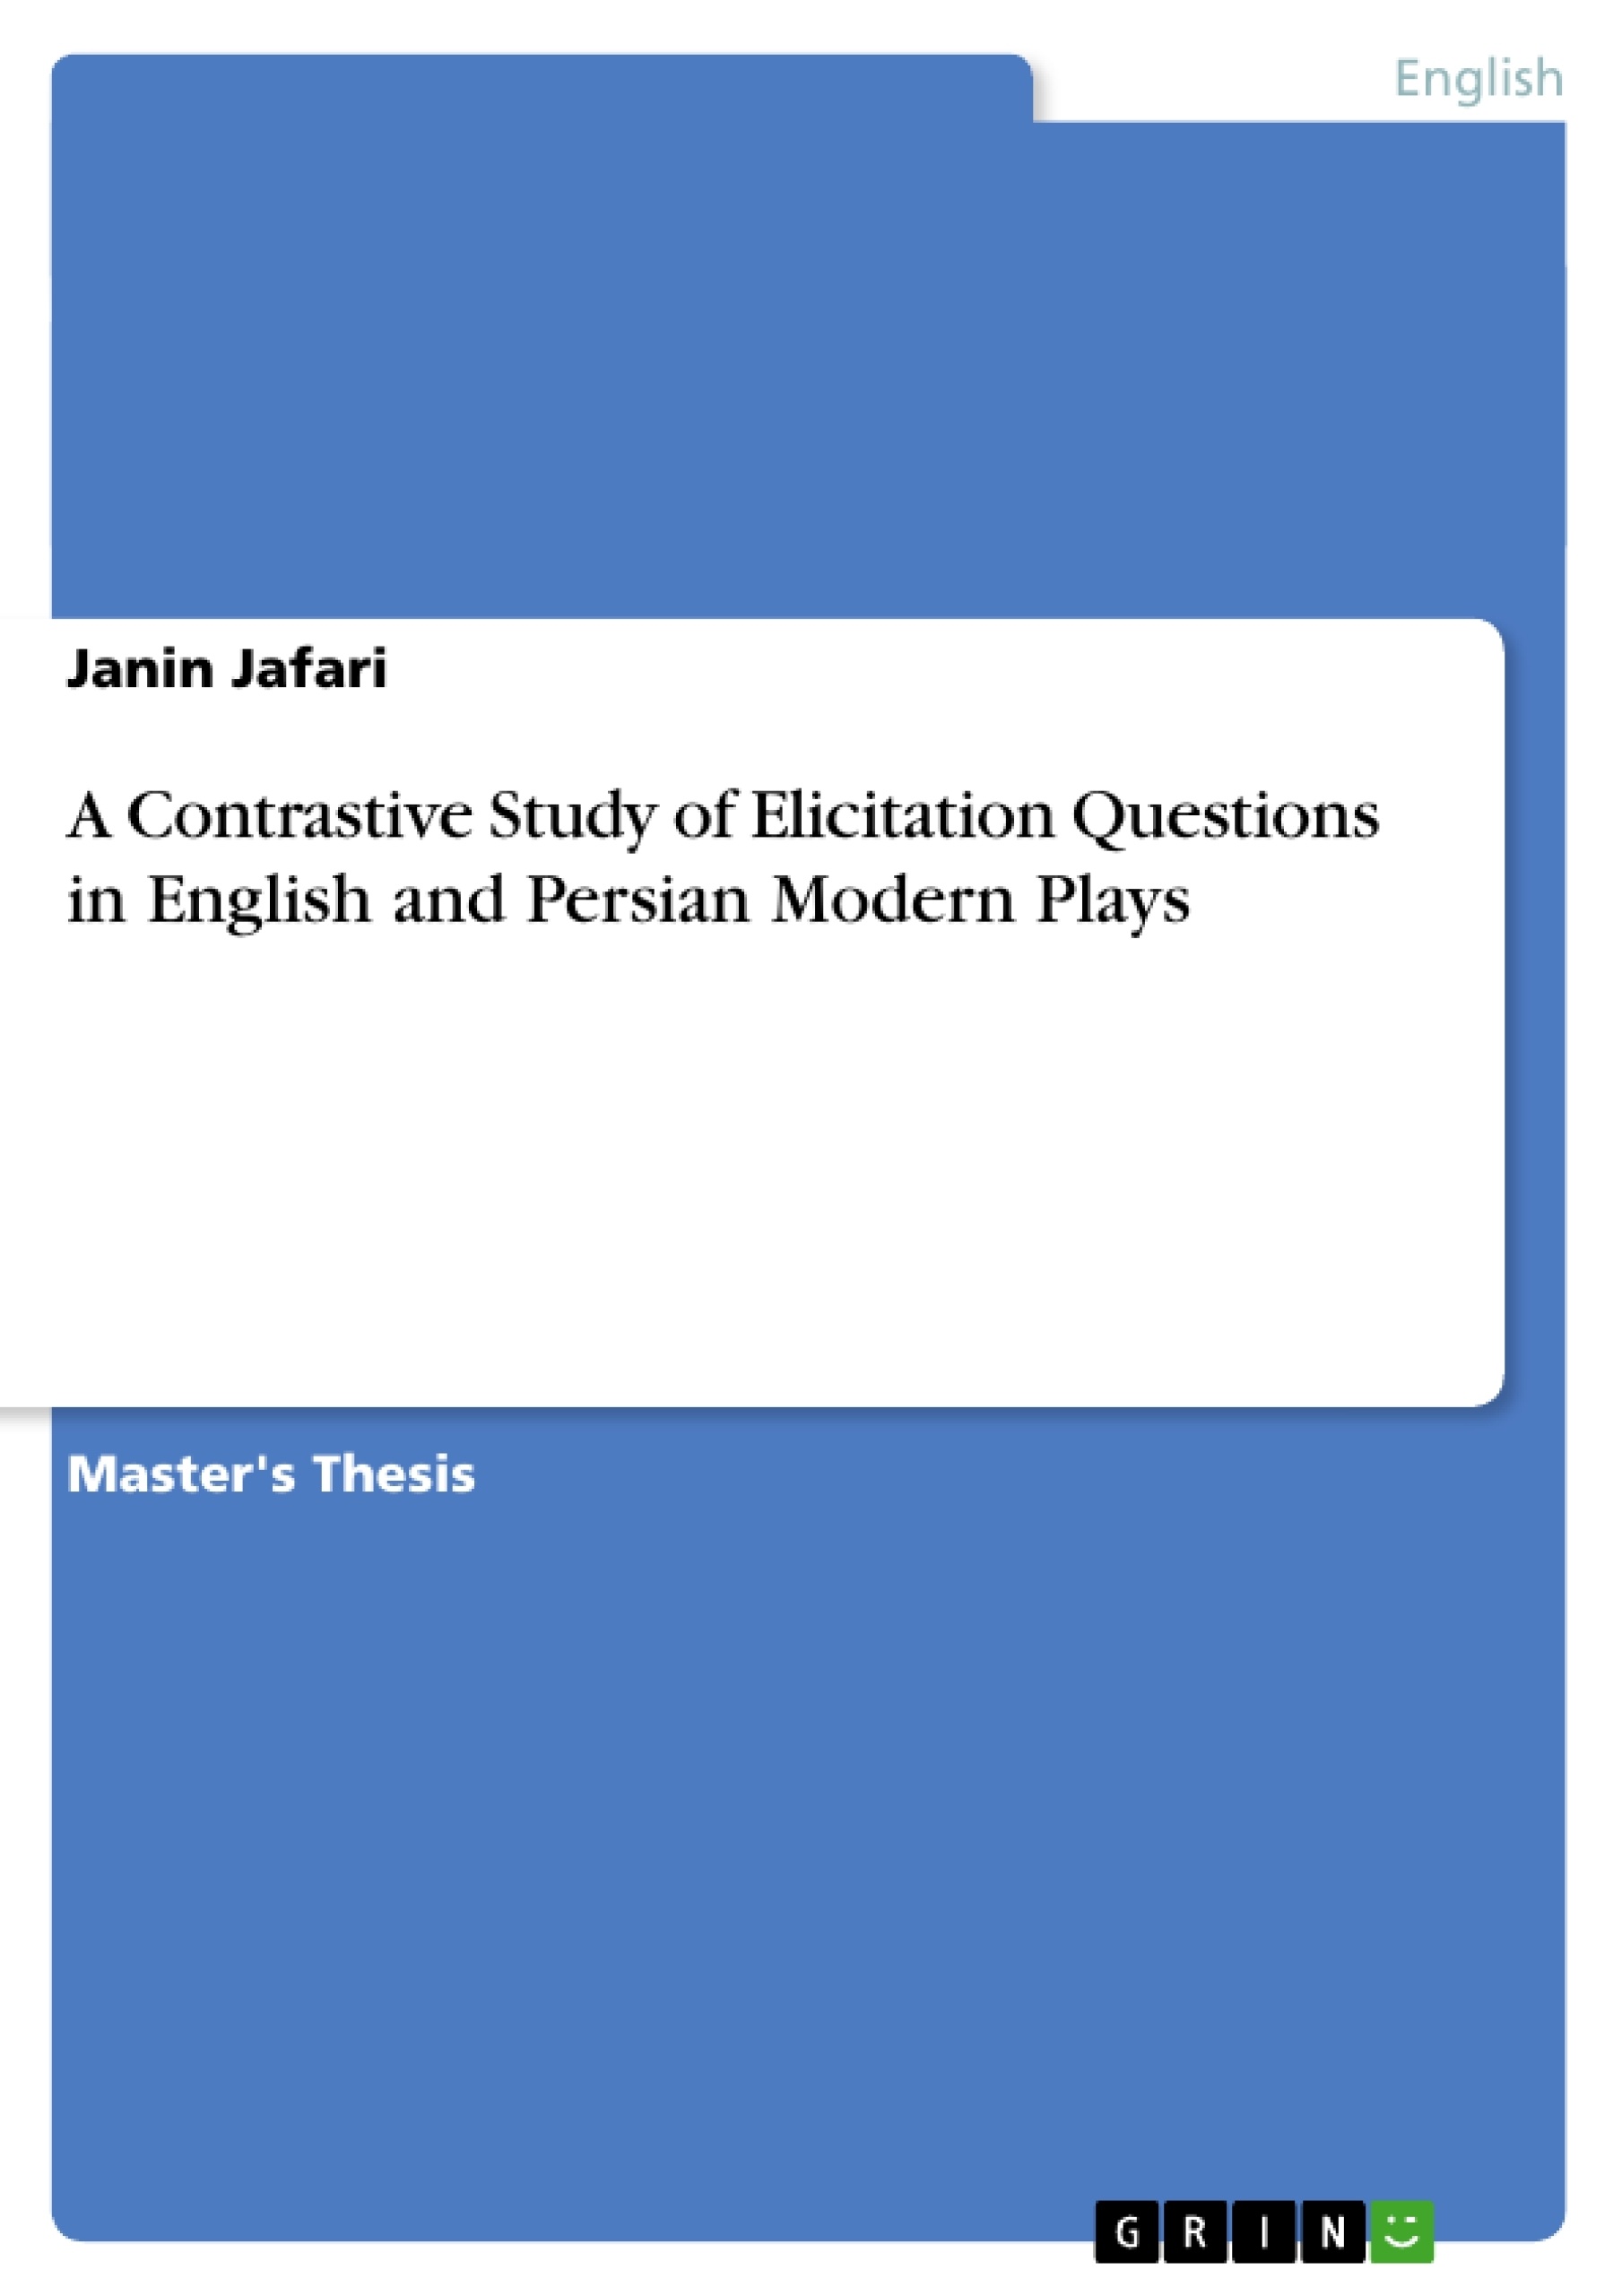 Titre: A Contrastive Study of Elicitation Questions in English and Persian Modern Plays